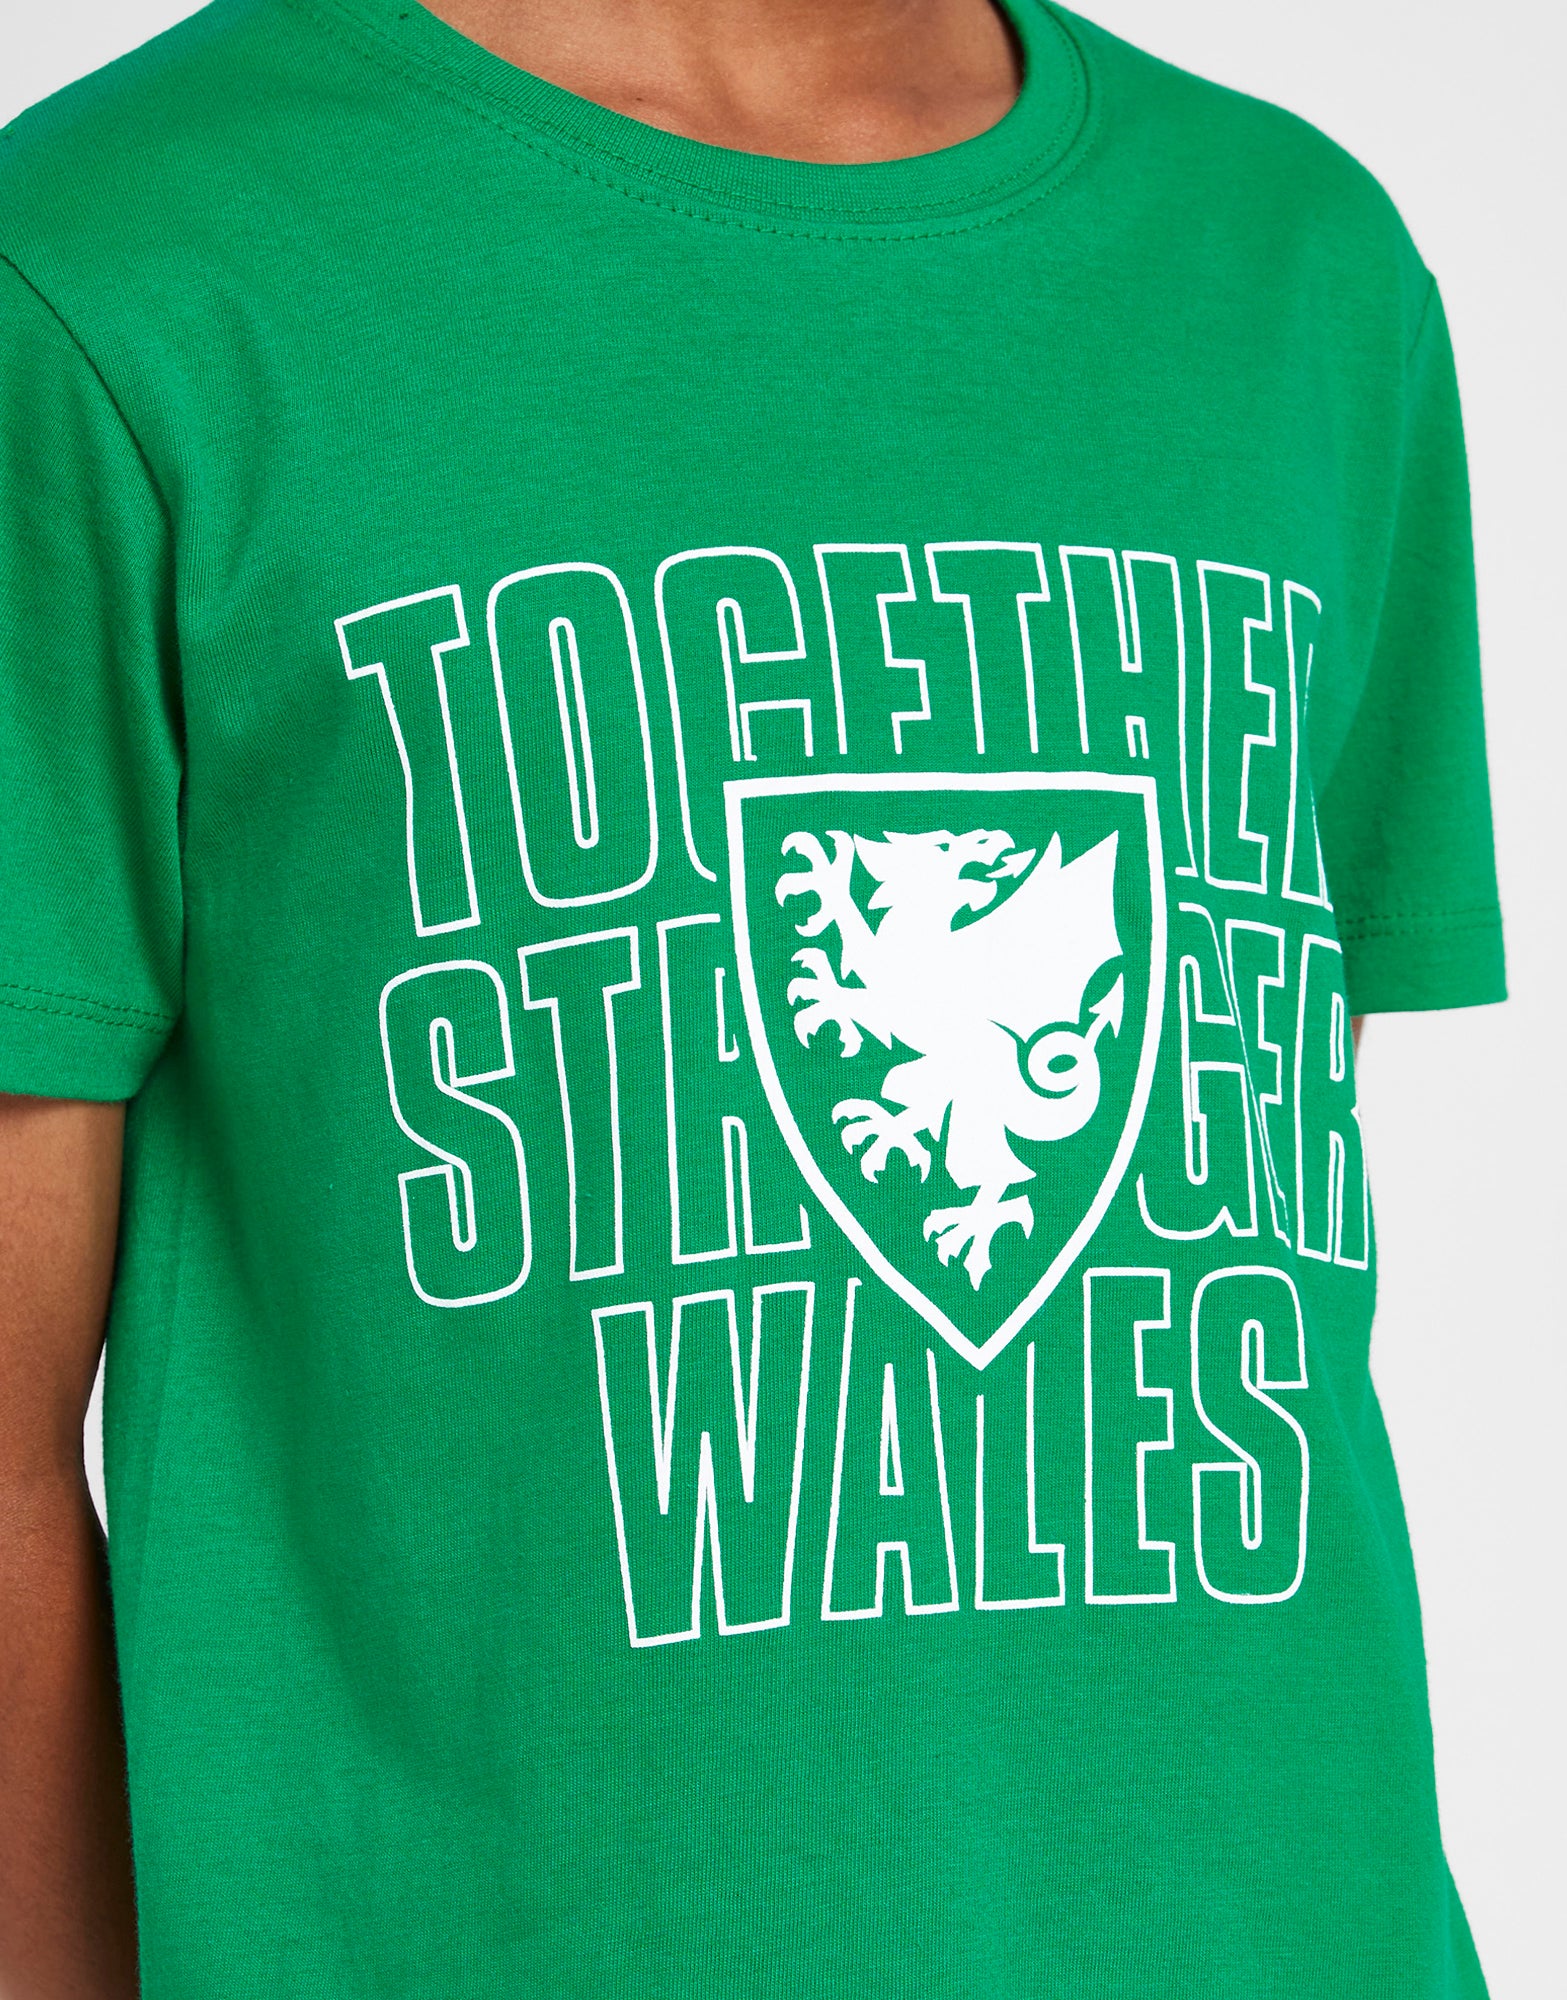 Official Team Wales Kids 'Together Stronger' T-Shirt - Green - The World Football Store